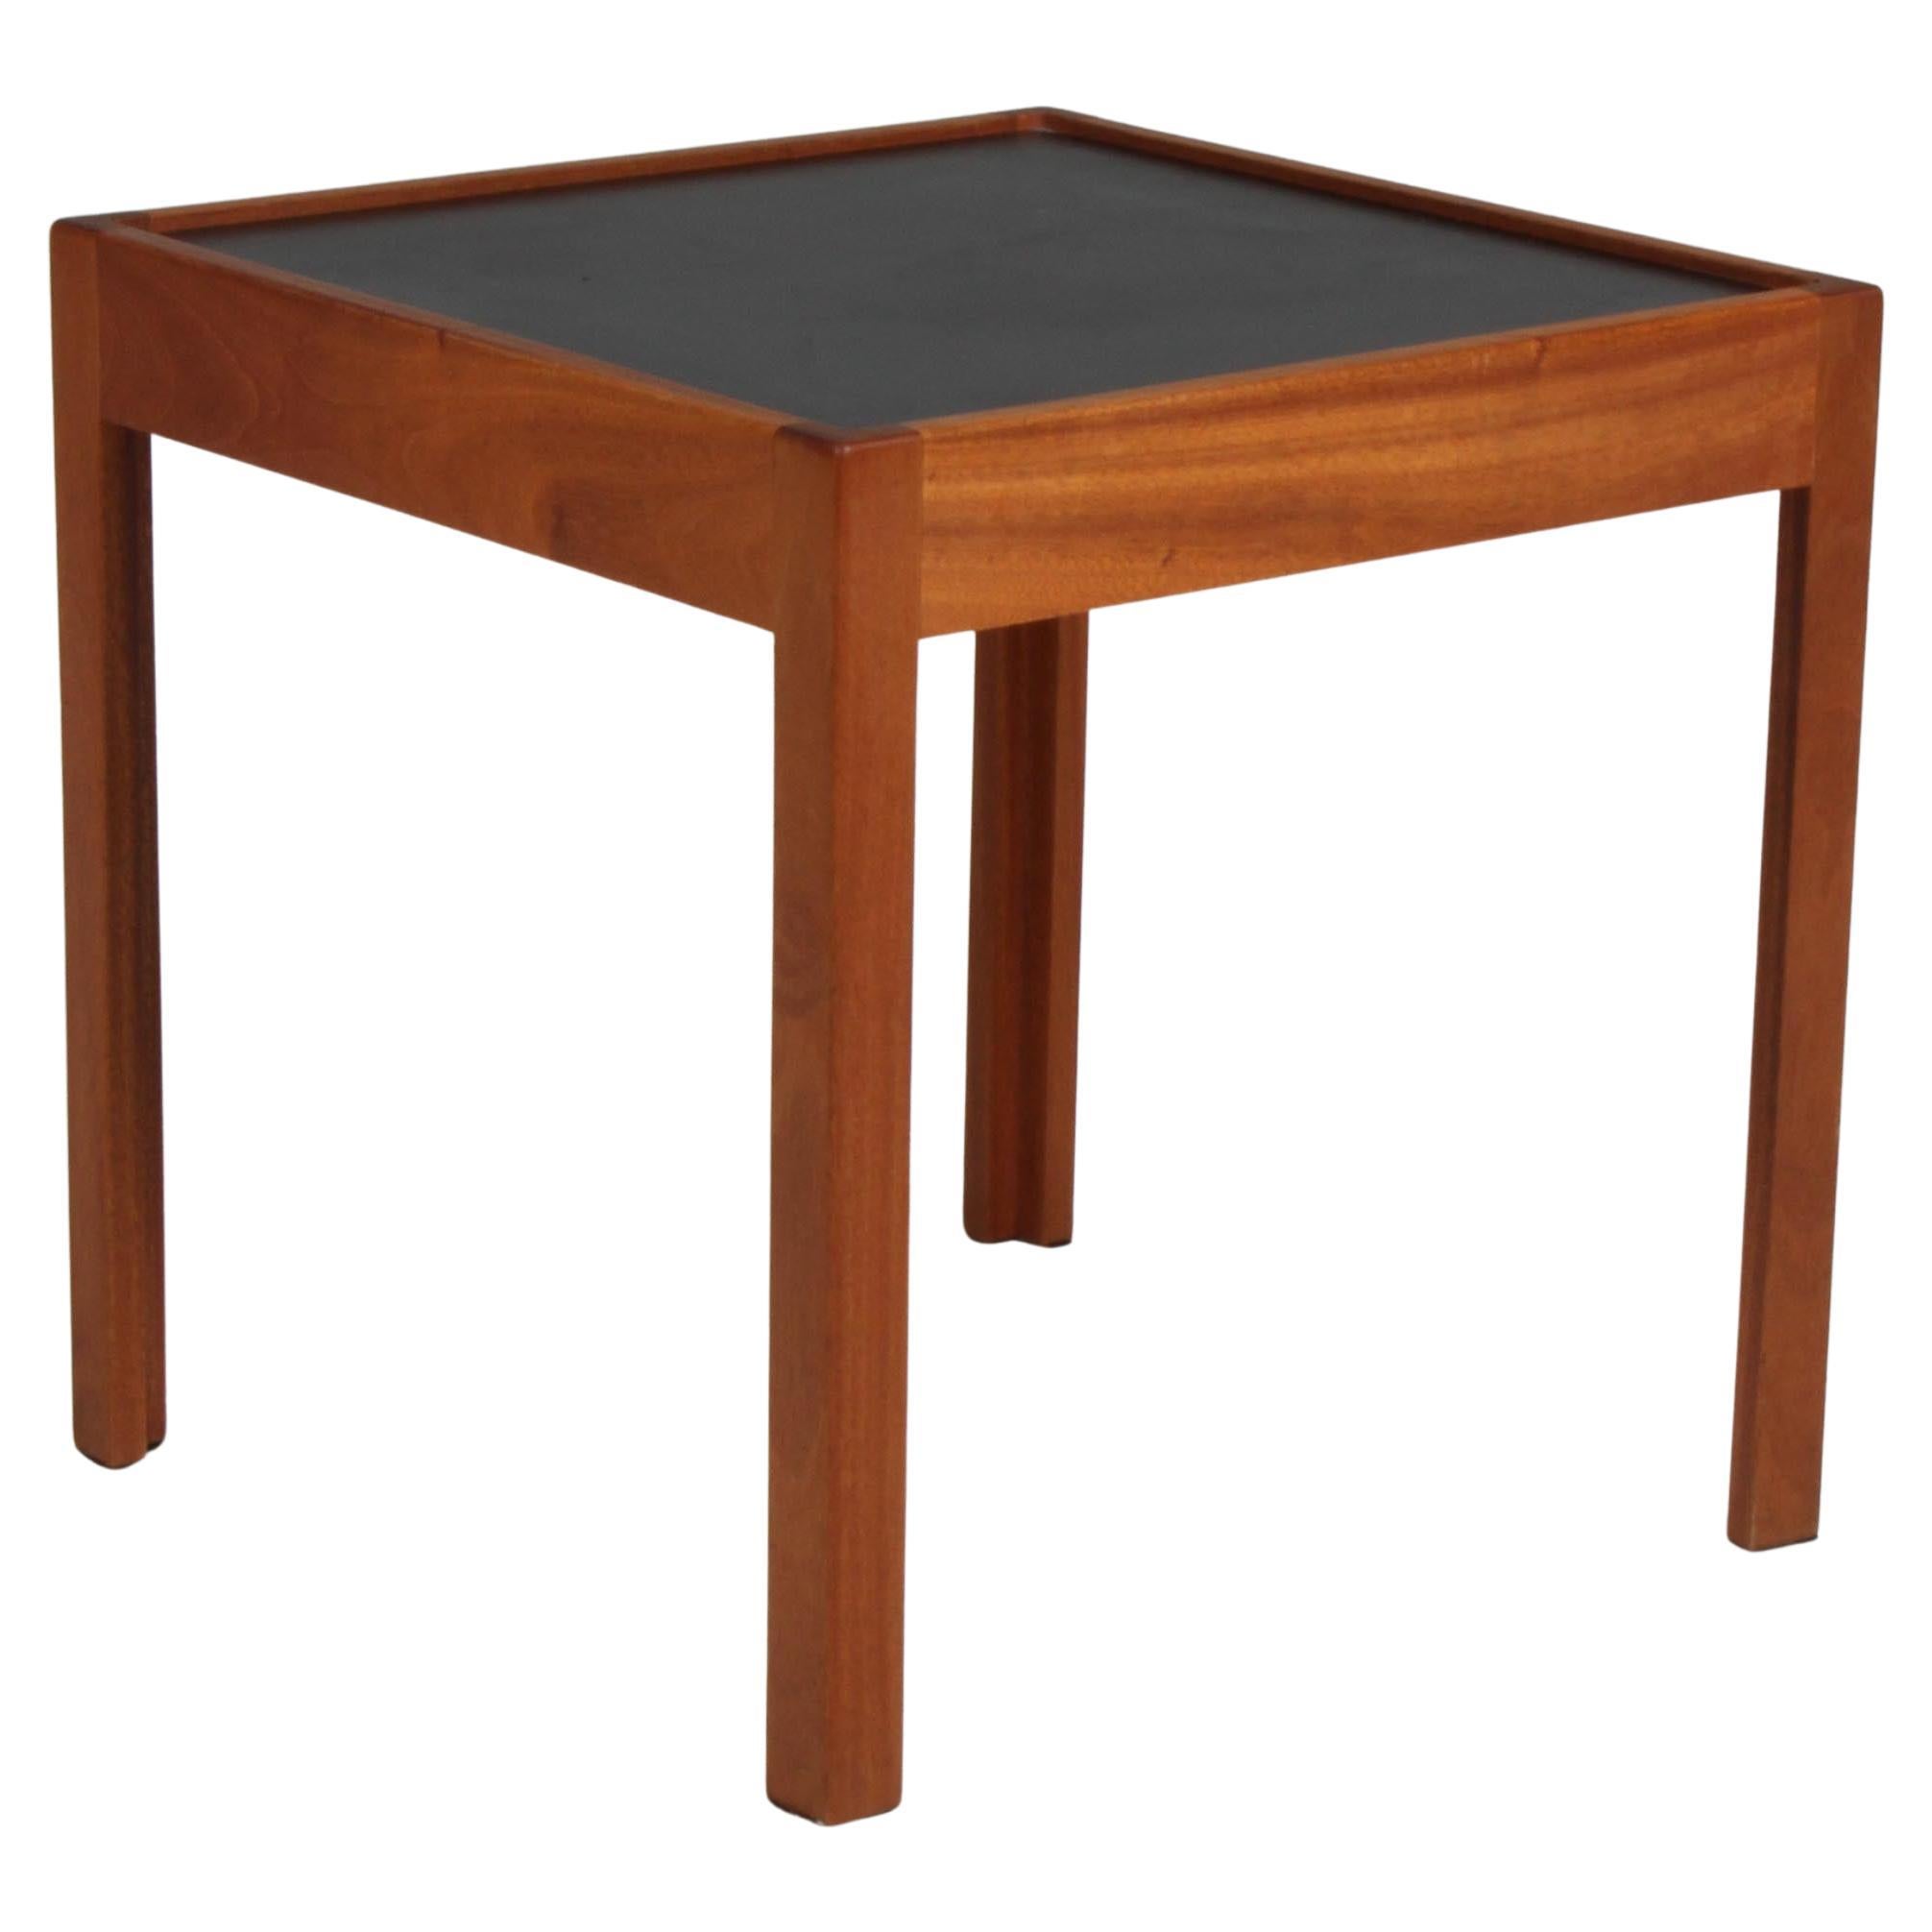 Rud Rasmussen side table of mahogany and formica, Denmark 1940s